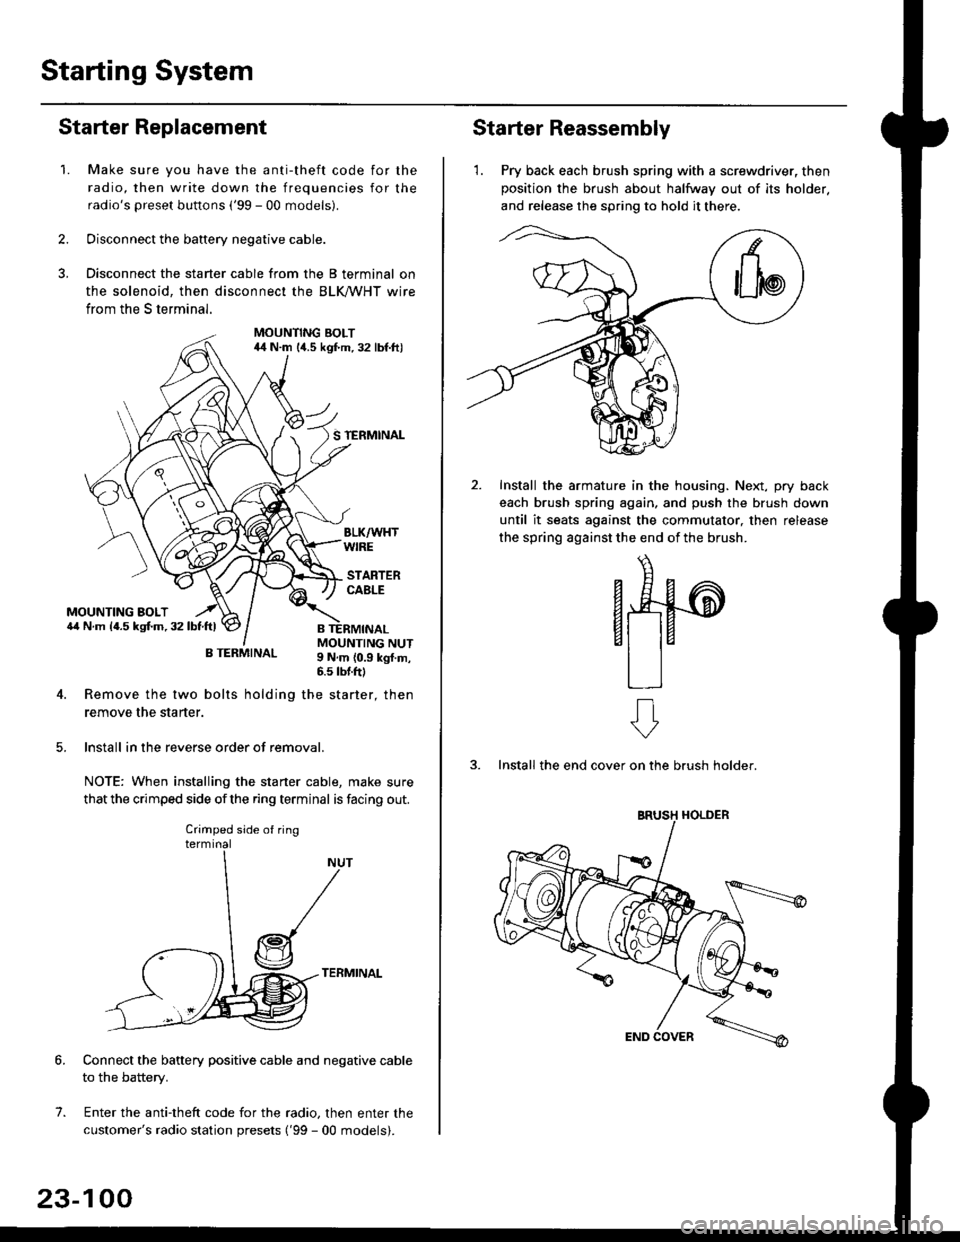 HONDA CIVIC 1998 6.G Workshop Manual Starting System
Starter Replacement
1.Make sure you have the anti-theft code for the
radio, then write down the frequencies for the
radios preset buttons (99 - 00 models).
Disconnect the battery neg